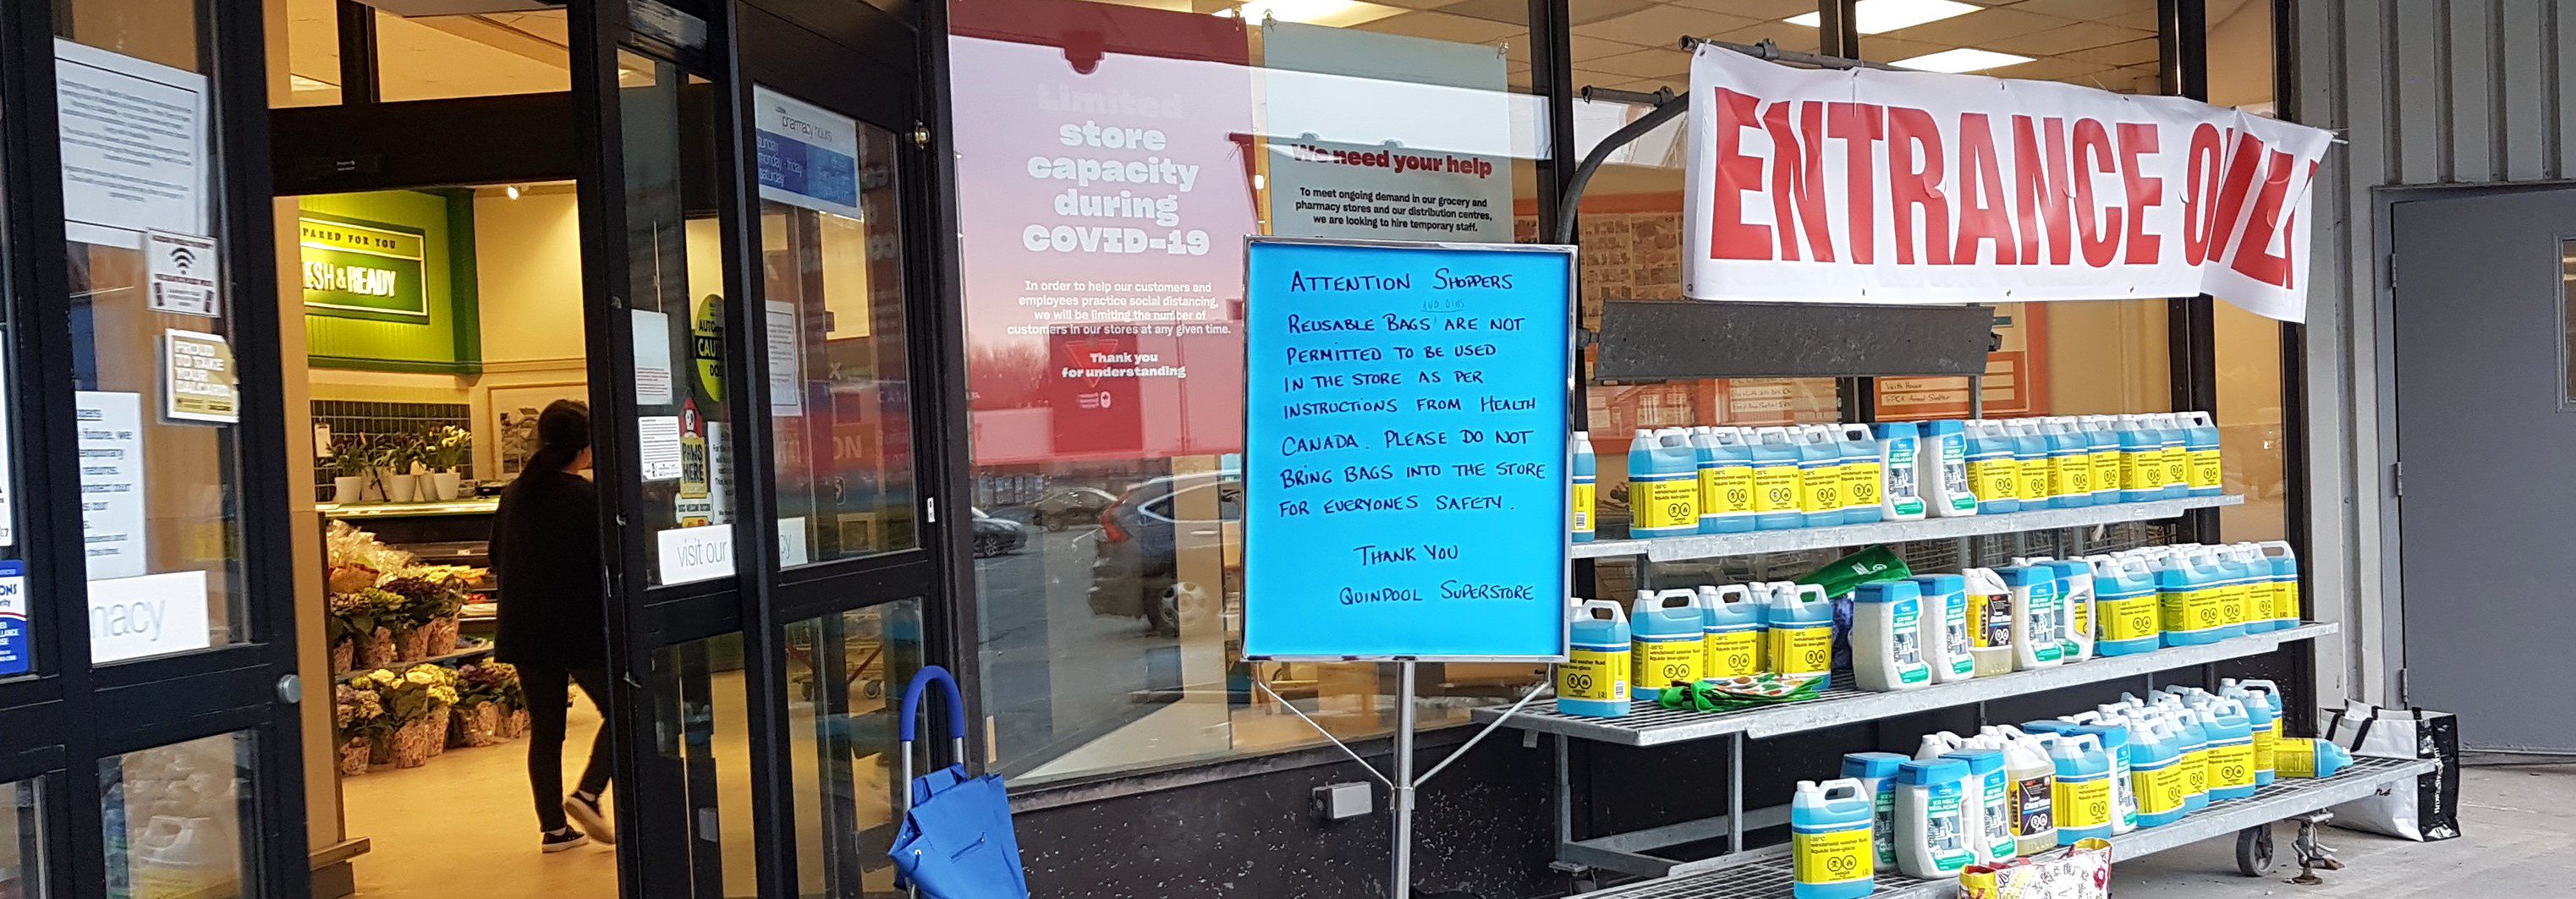 A sign in front of an Atlantic Superstore grocery store in Halifax, Nova Scotia, Canada, on April 8, 2020, is advising customers to leave reusable cotton bags outside of the store and not bring them inside for public health reasons during the coronavirus / covid-19 pandemic.